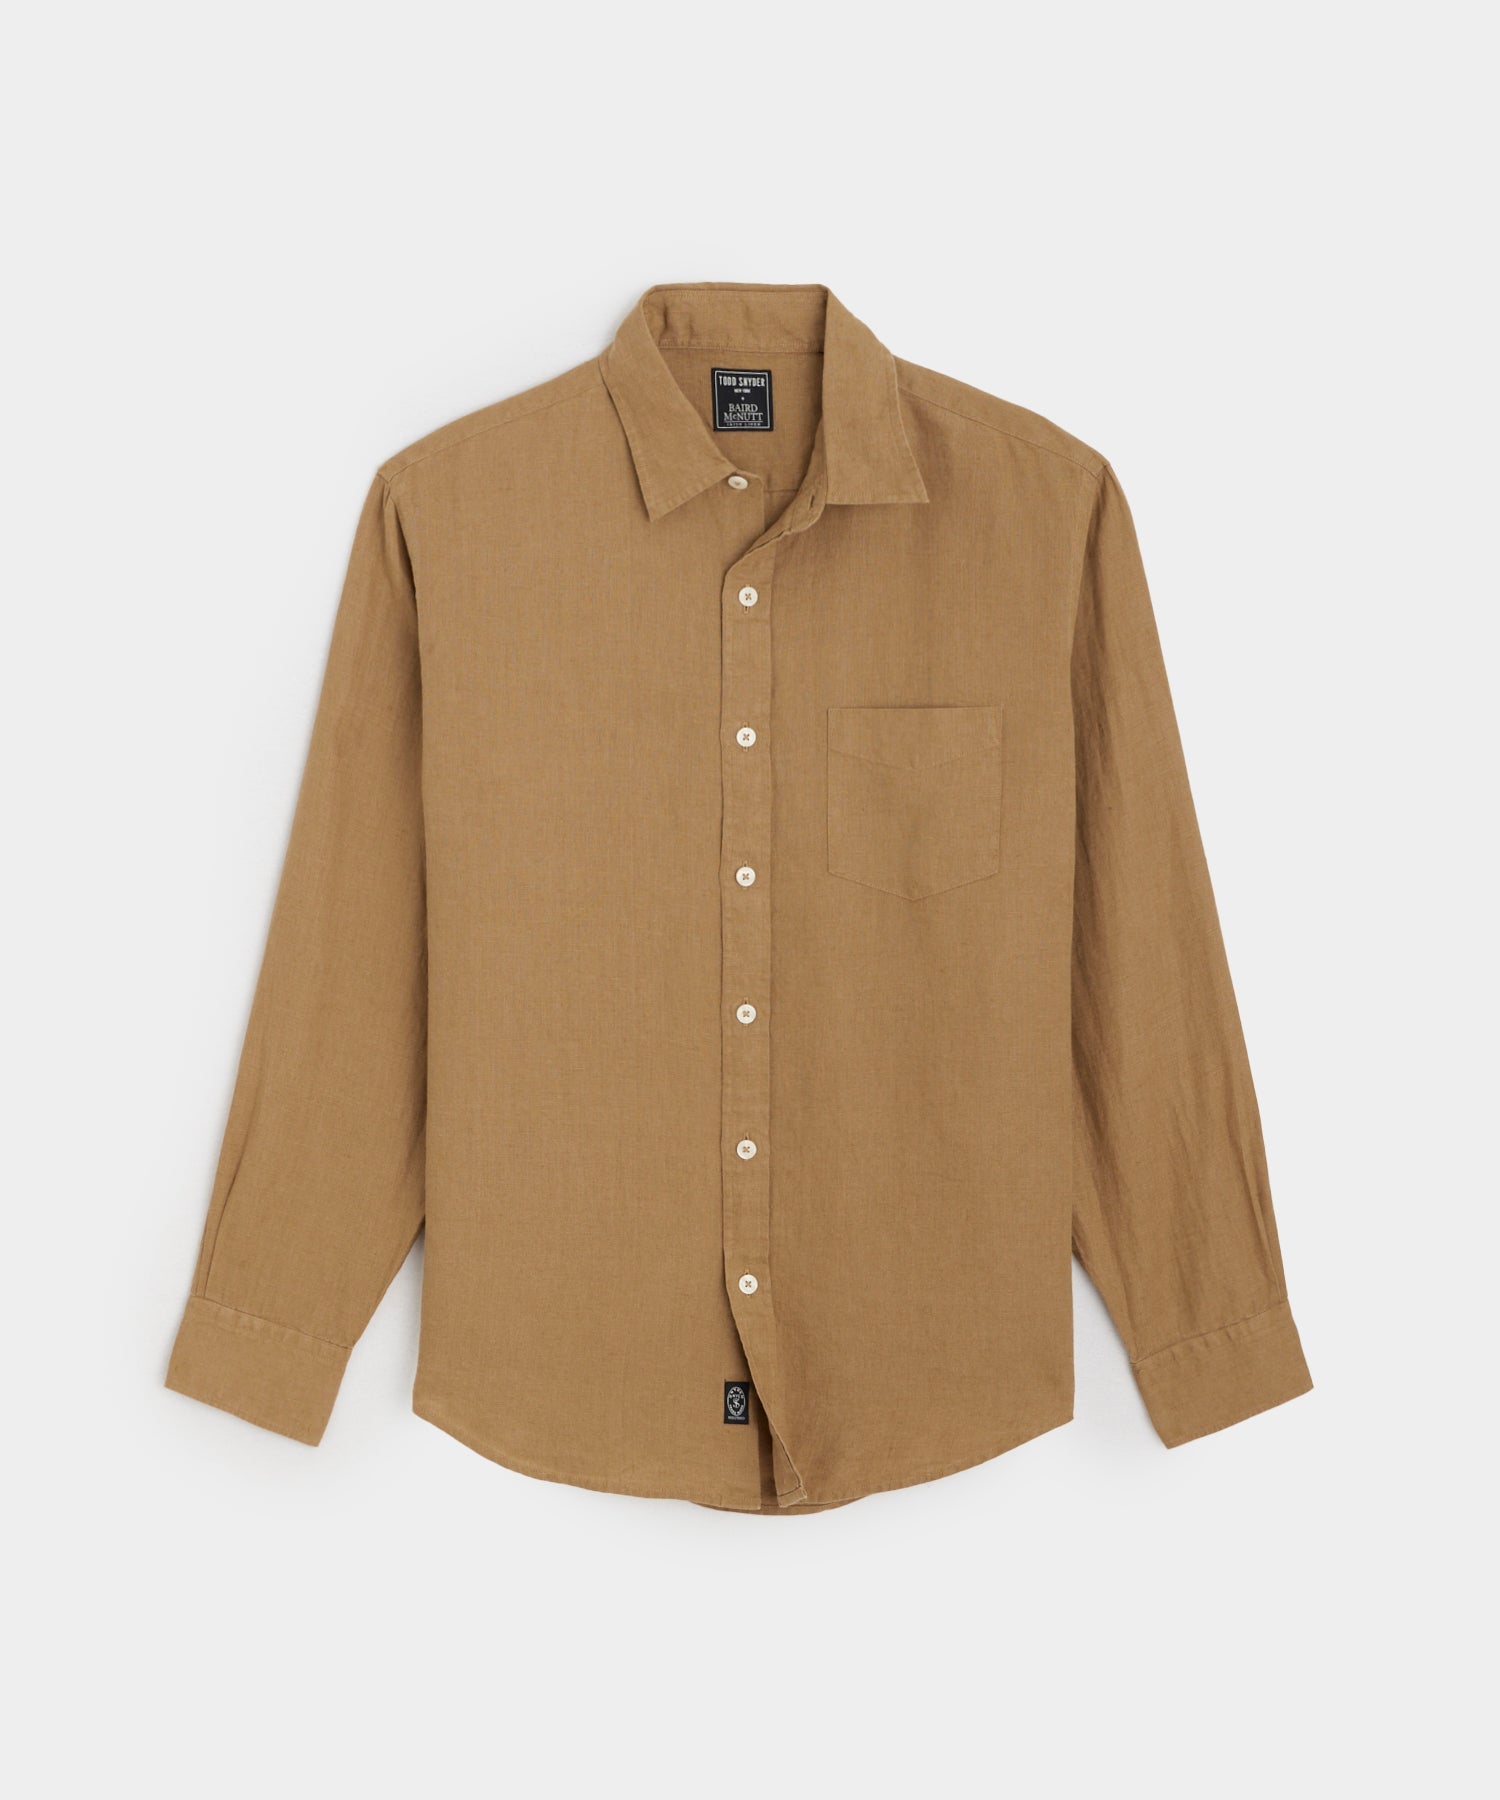 Classic Fit Sea Soft Irish Linen Shirt in Vintage Brown